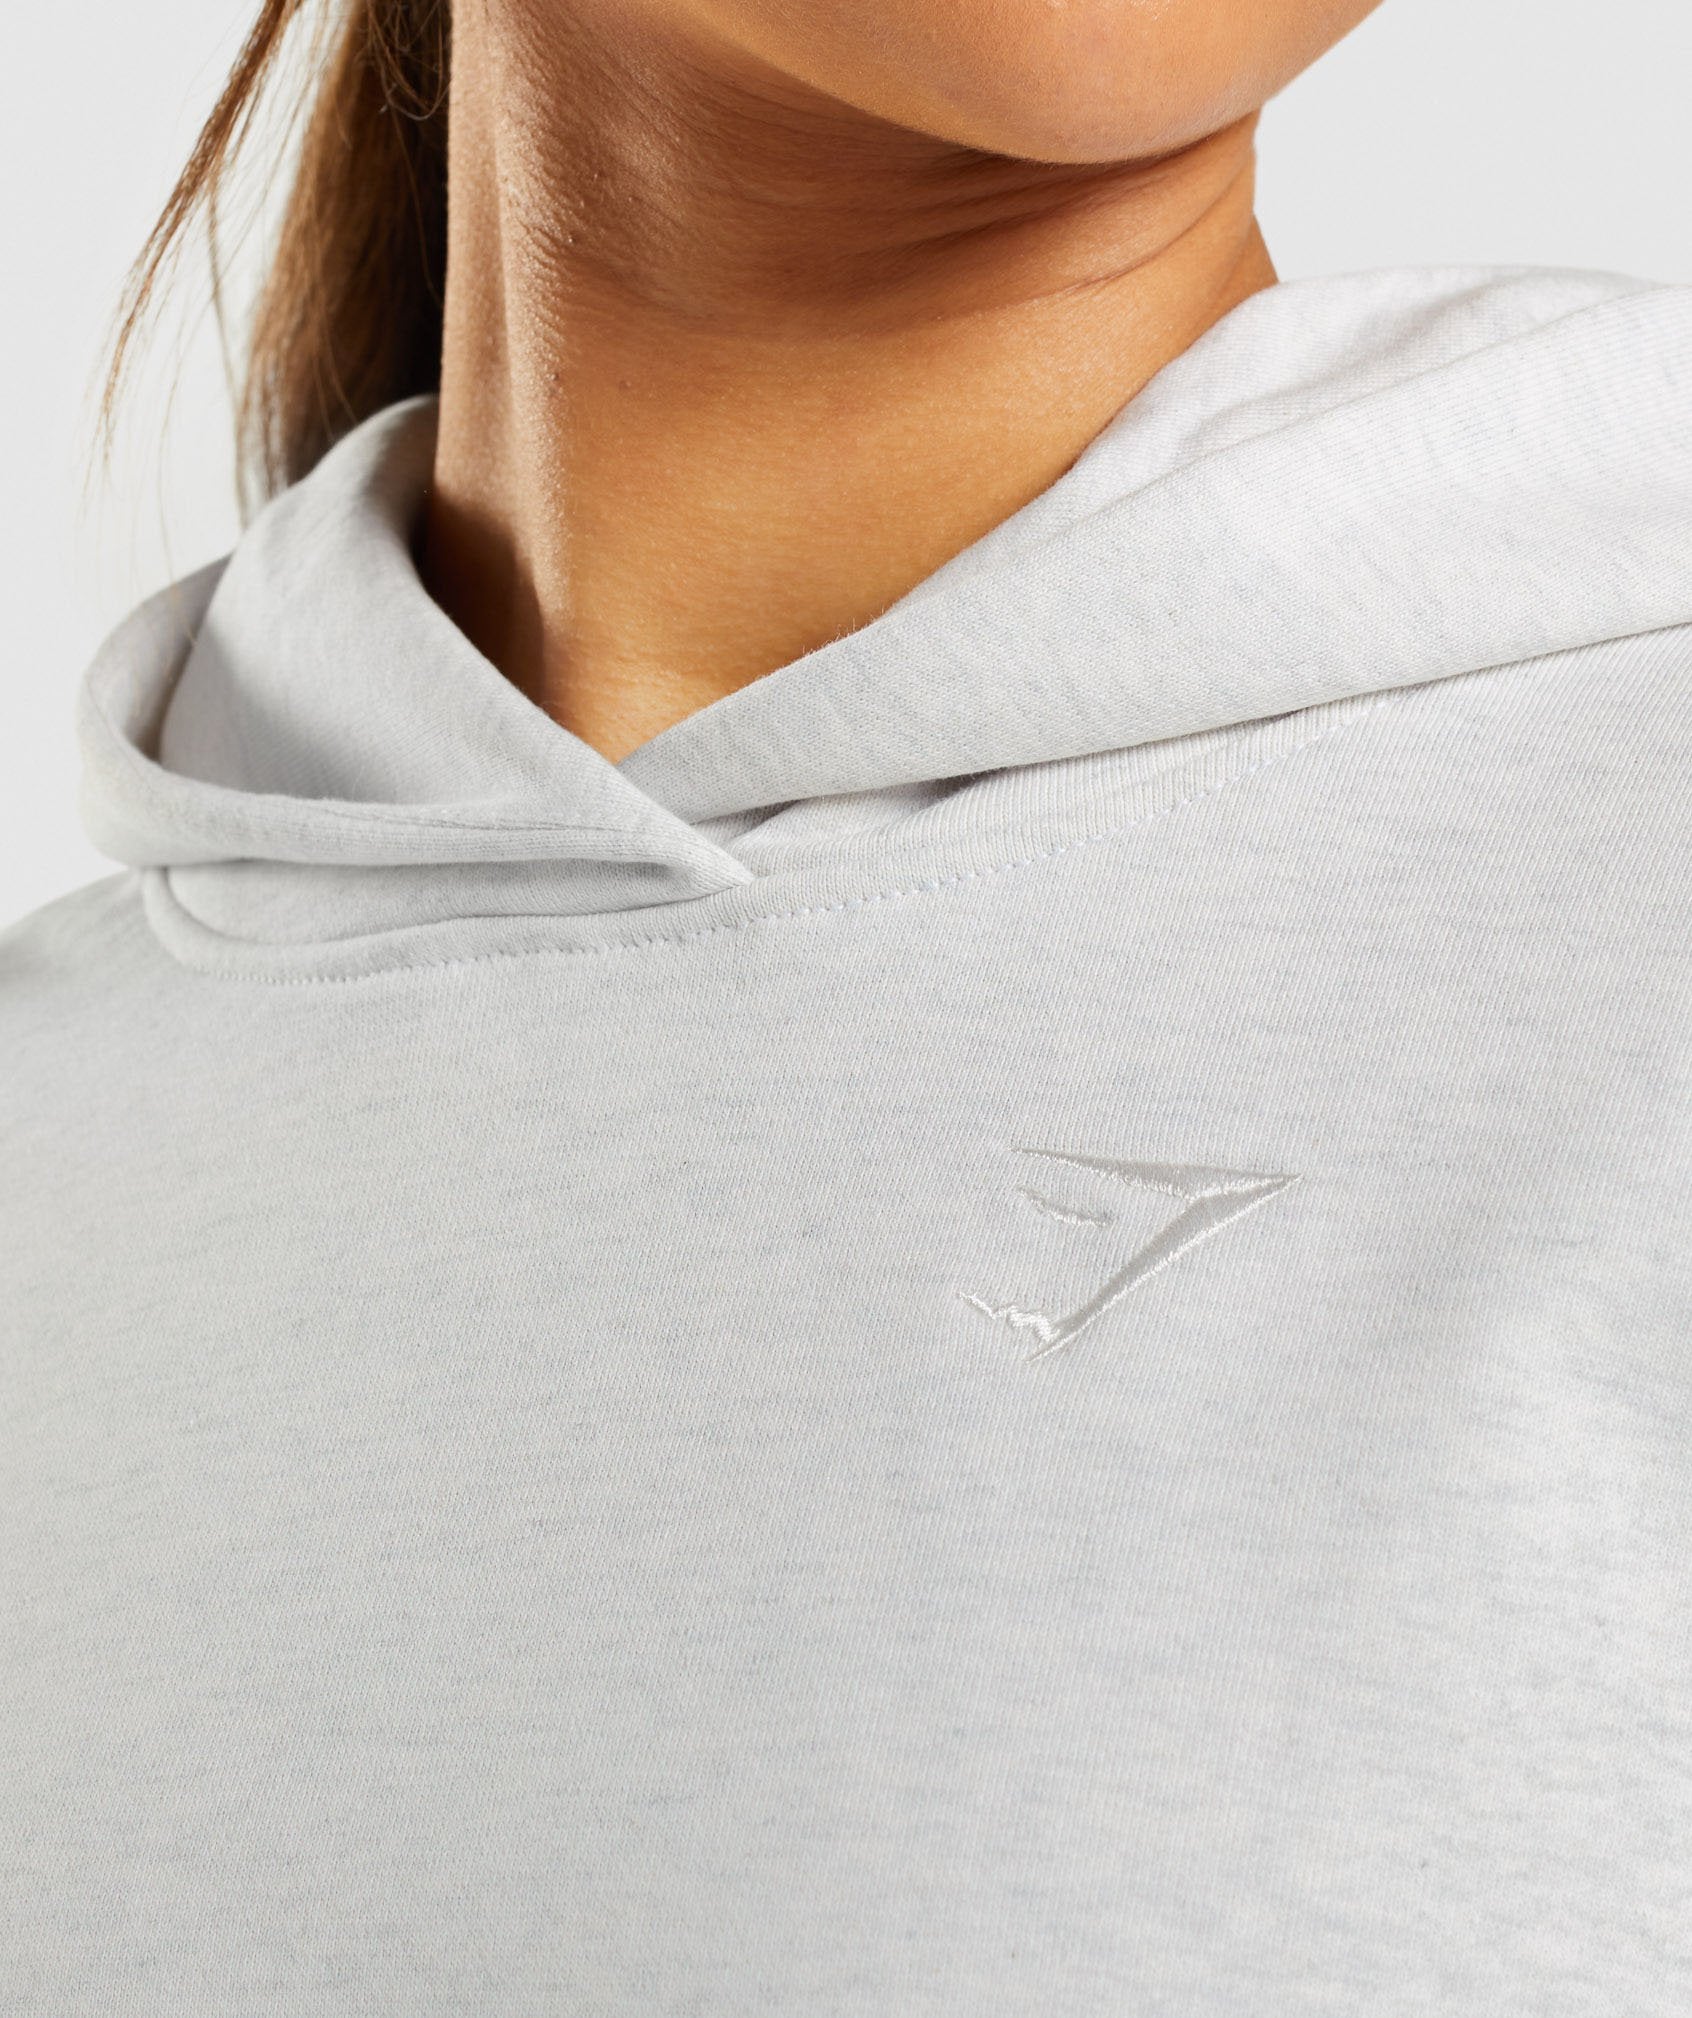 Rest Day Sweats Hoodie in White Marl - view 6